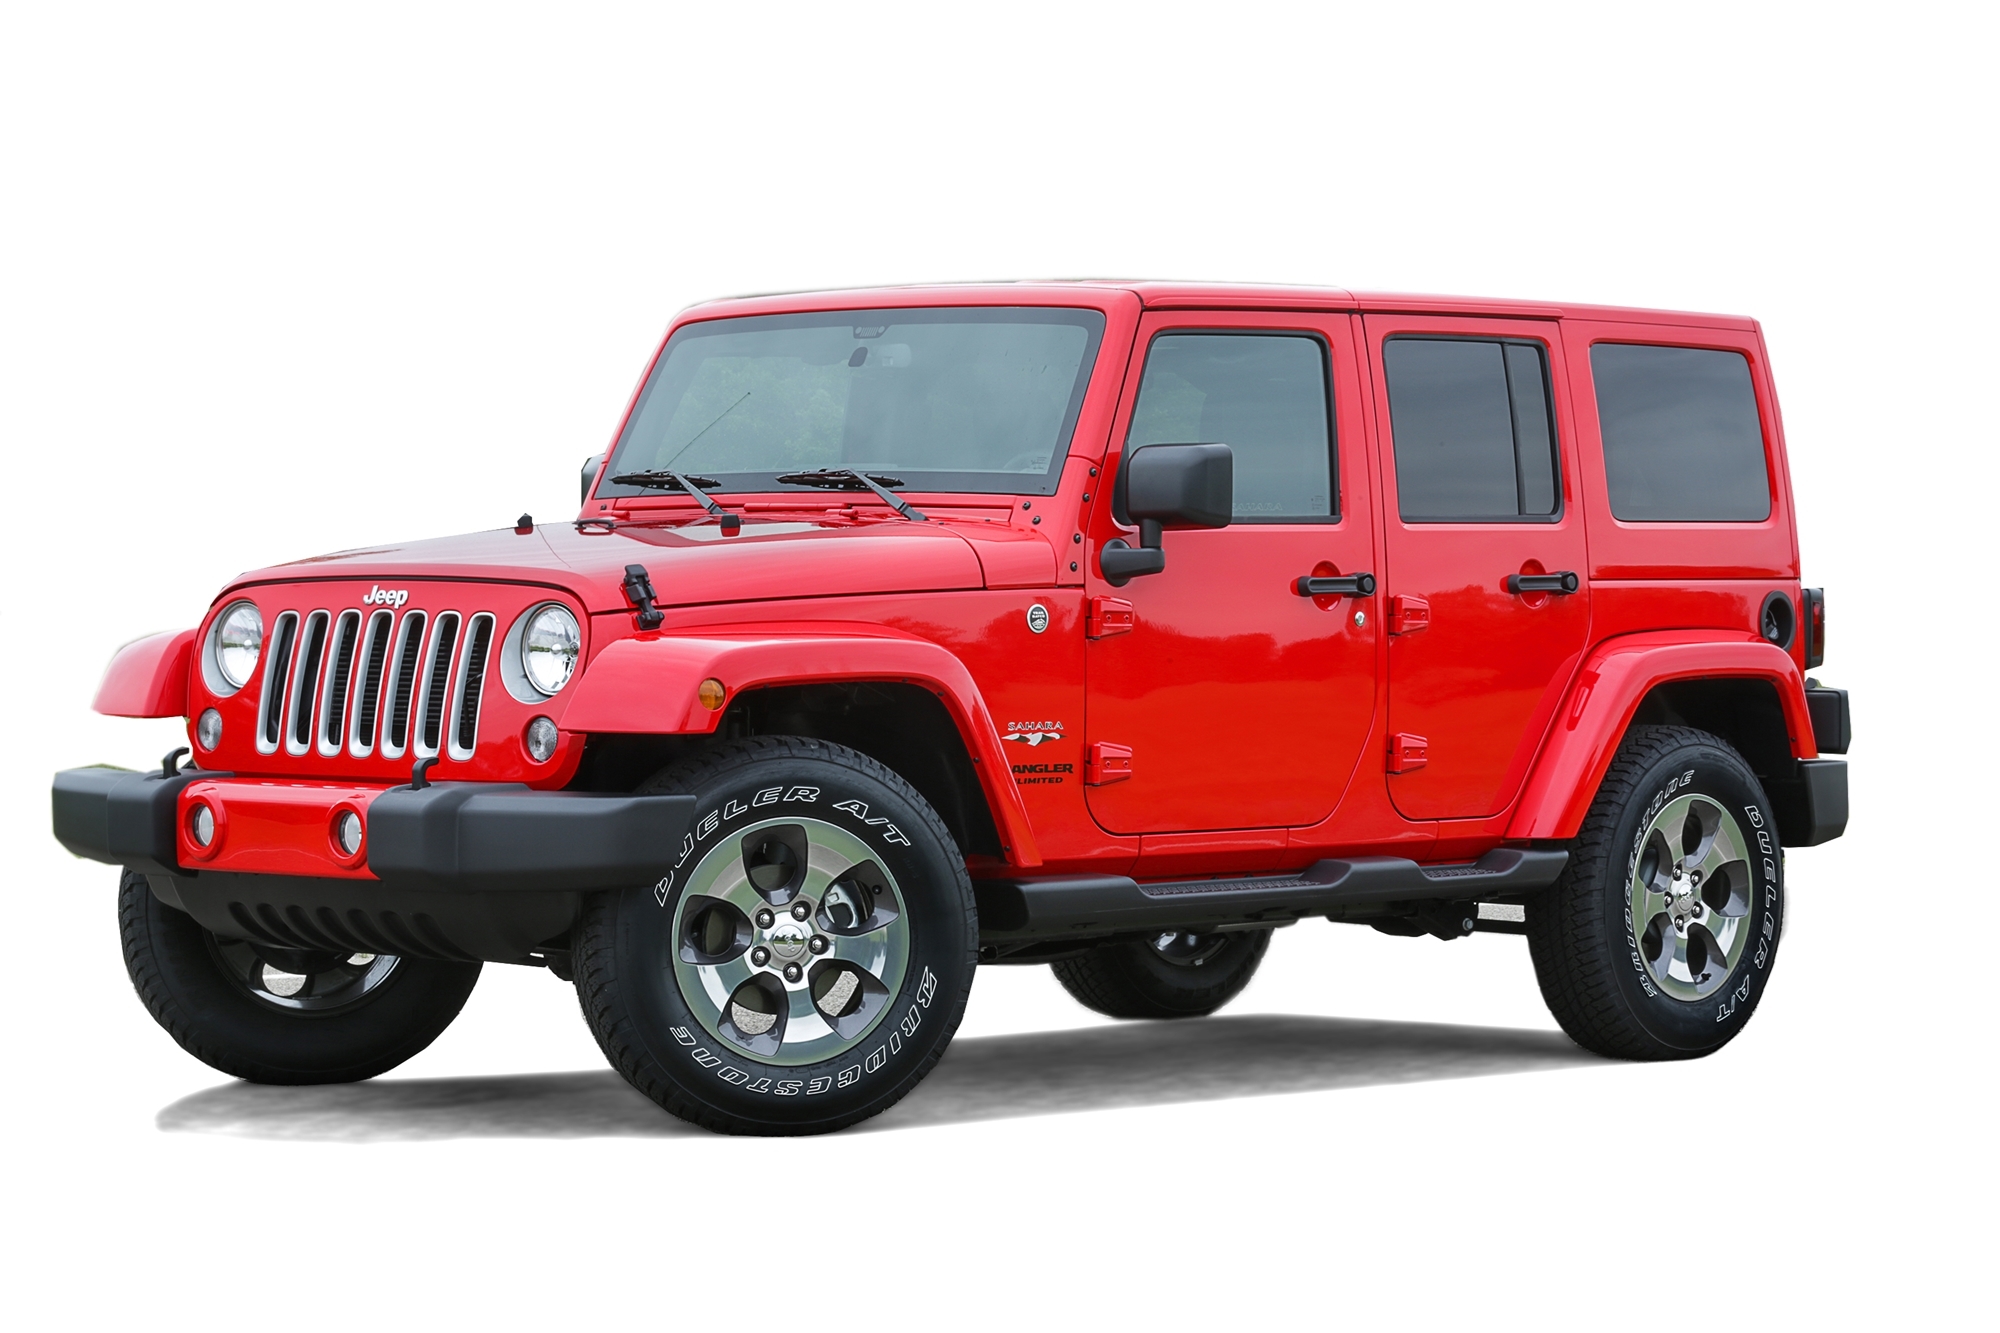 2017 Jeep Wrangler Unlimited Smoky Mountain Full Specs, Features and Price  | CarBuzz